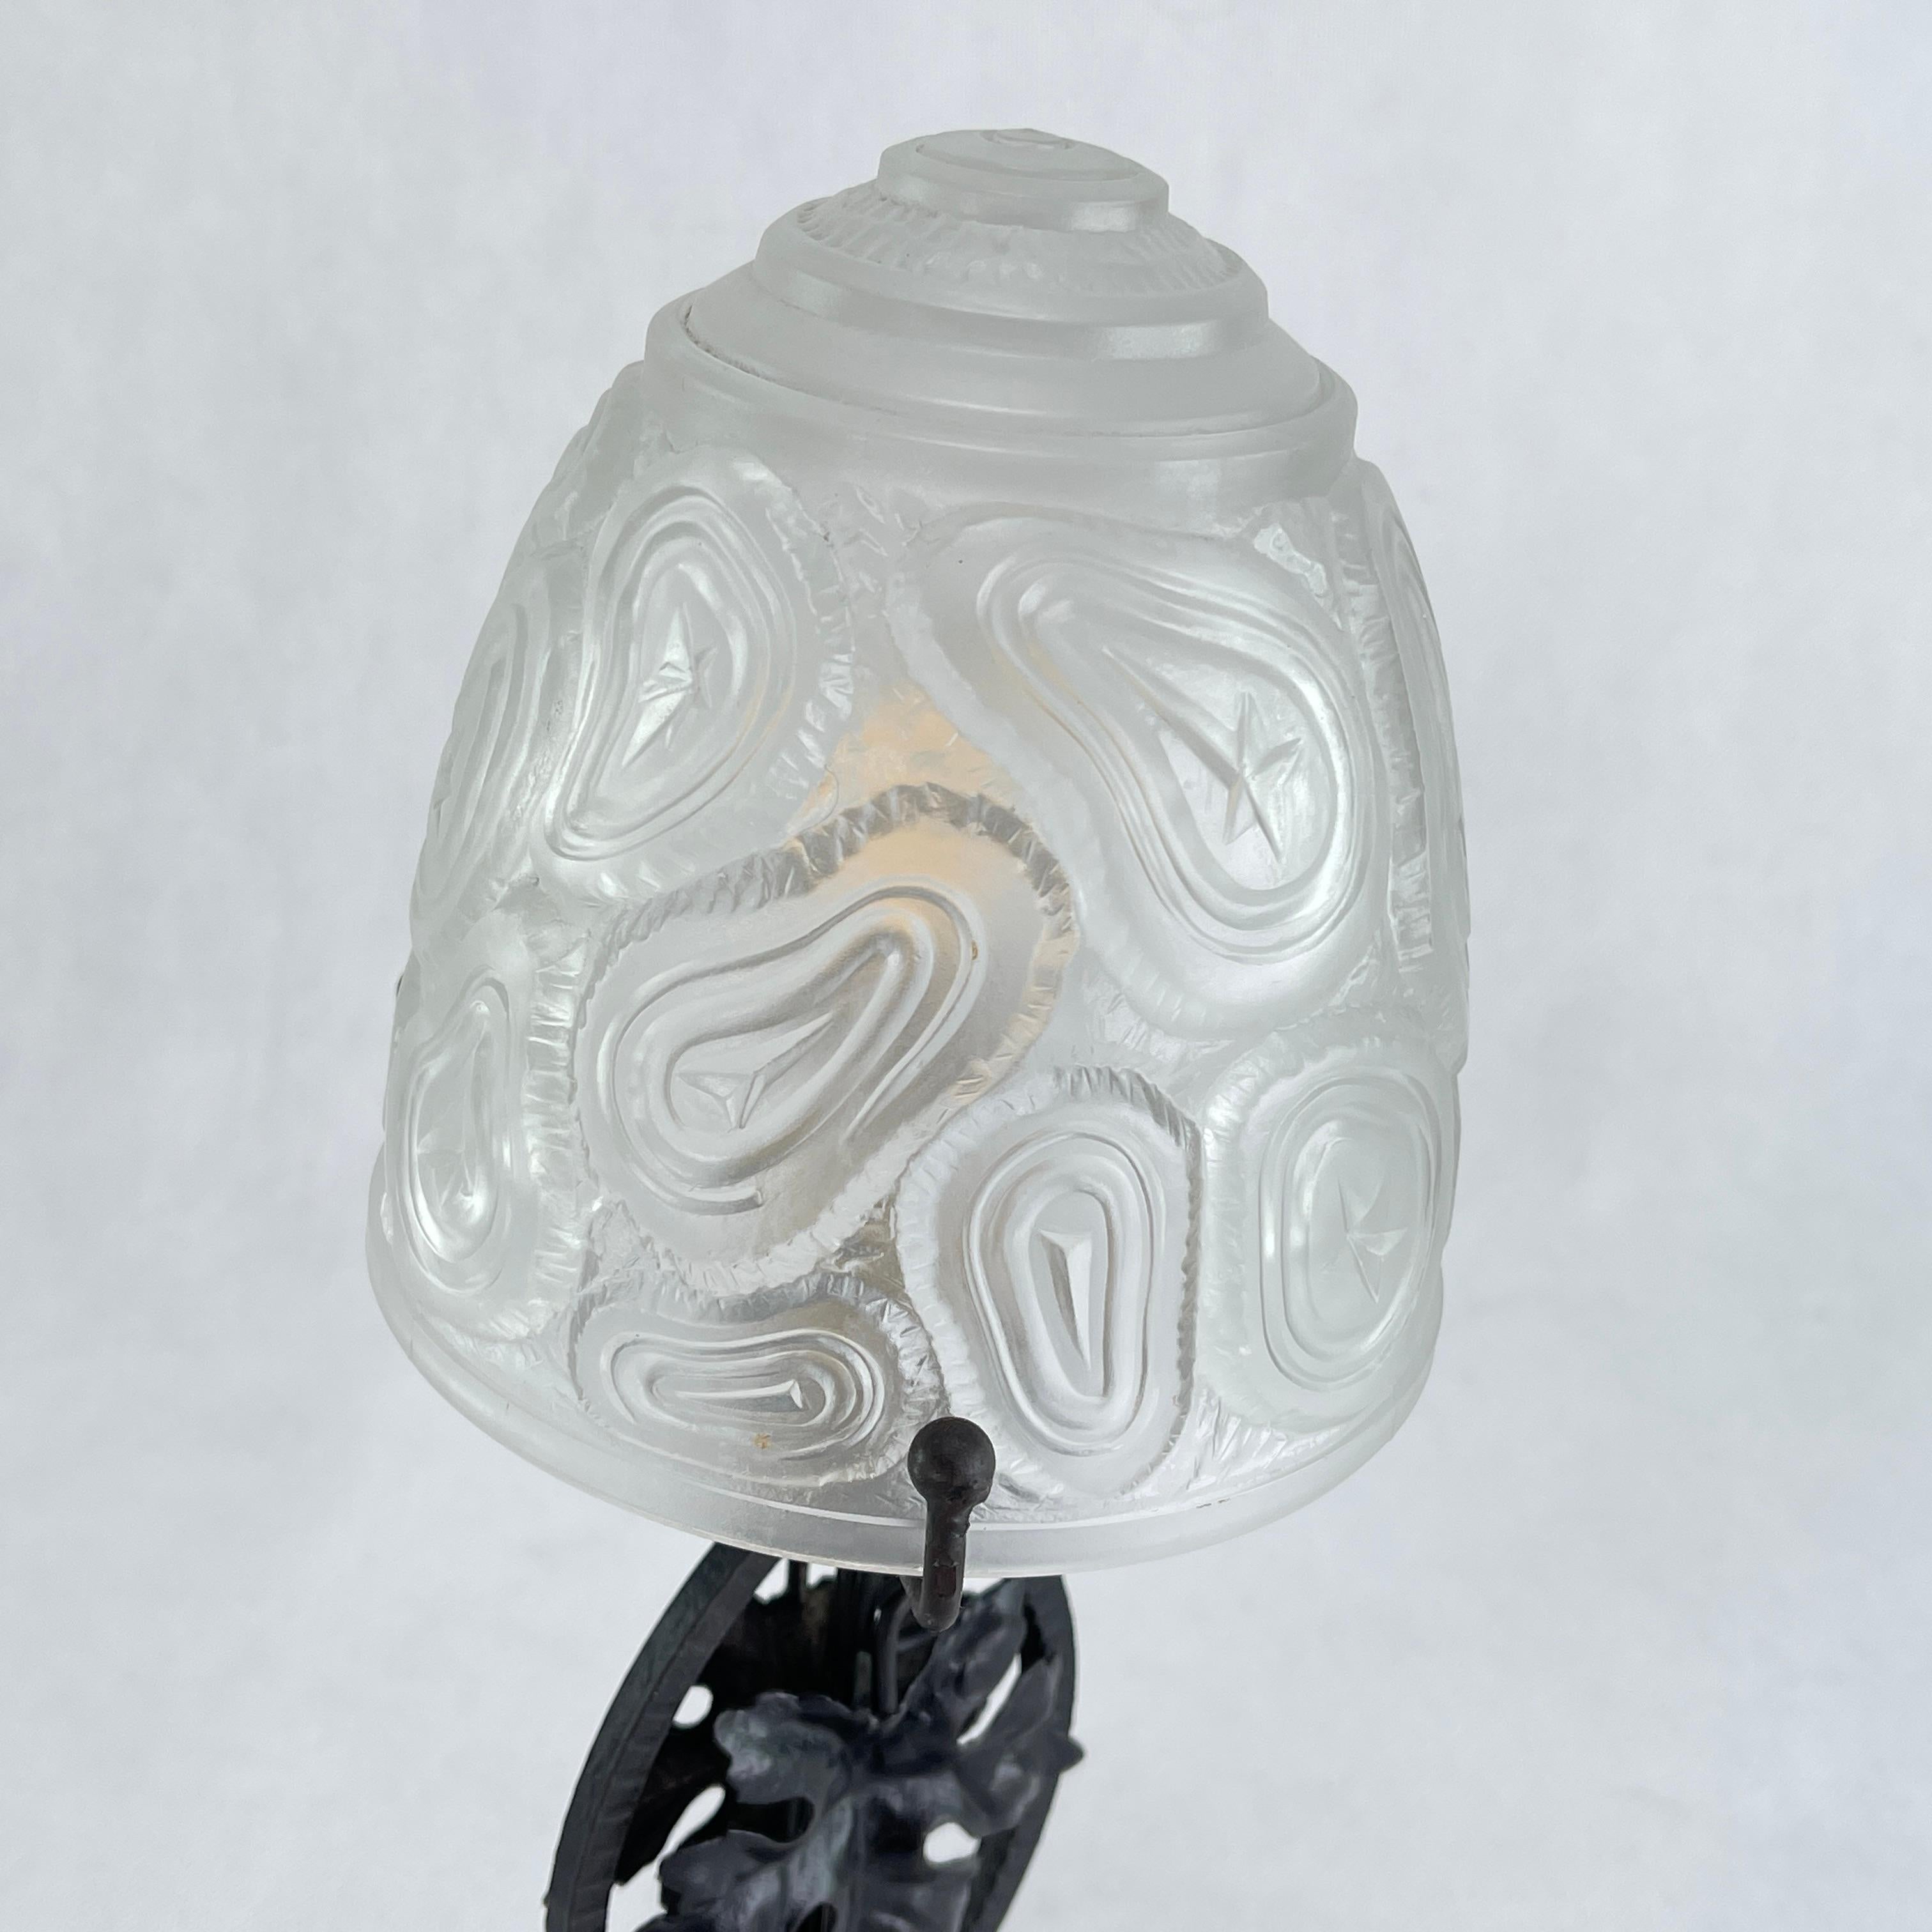 Art Deco Table Lamp - 1930s

A wonderful French 1930s Art Deco table lamps. The lamp has a black metal base and a pressed glass lampshade. This table lamp is an absolute design classic from the ART DECOS period.

The cleaned item gives a very